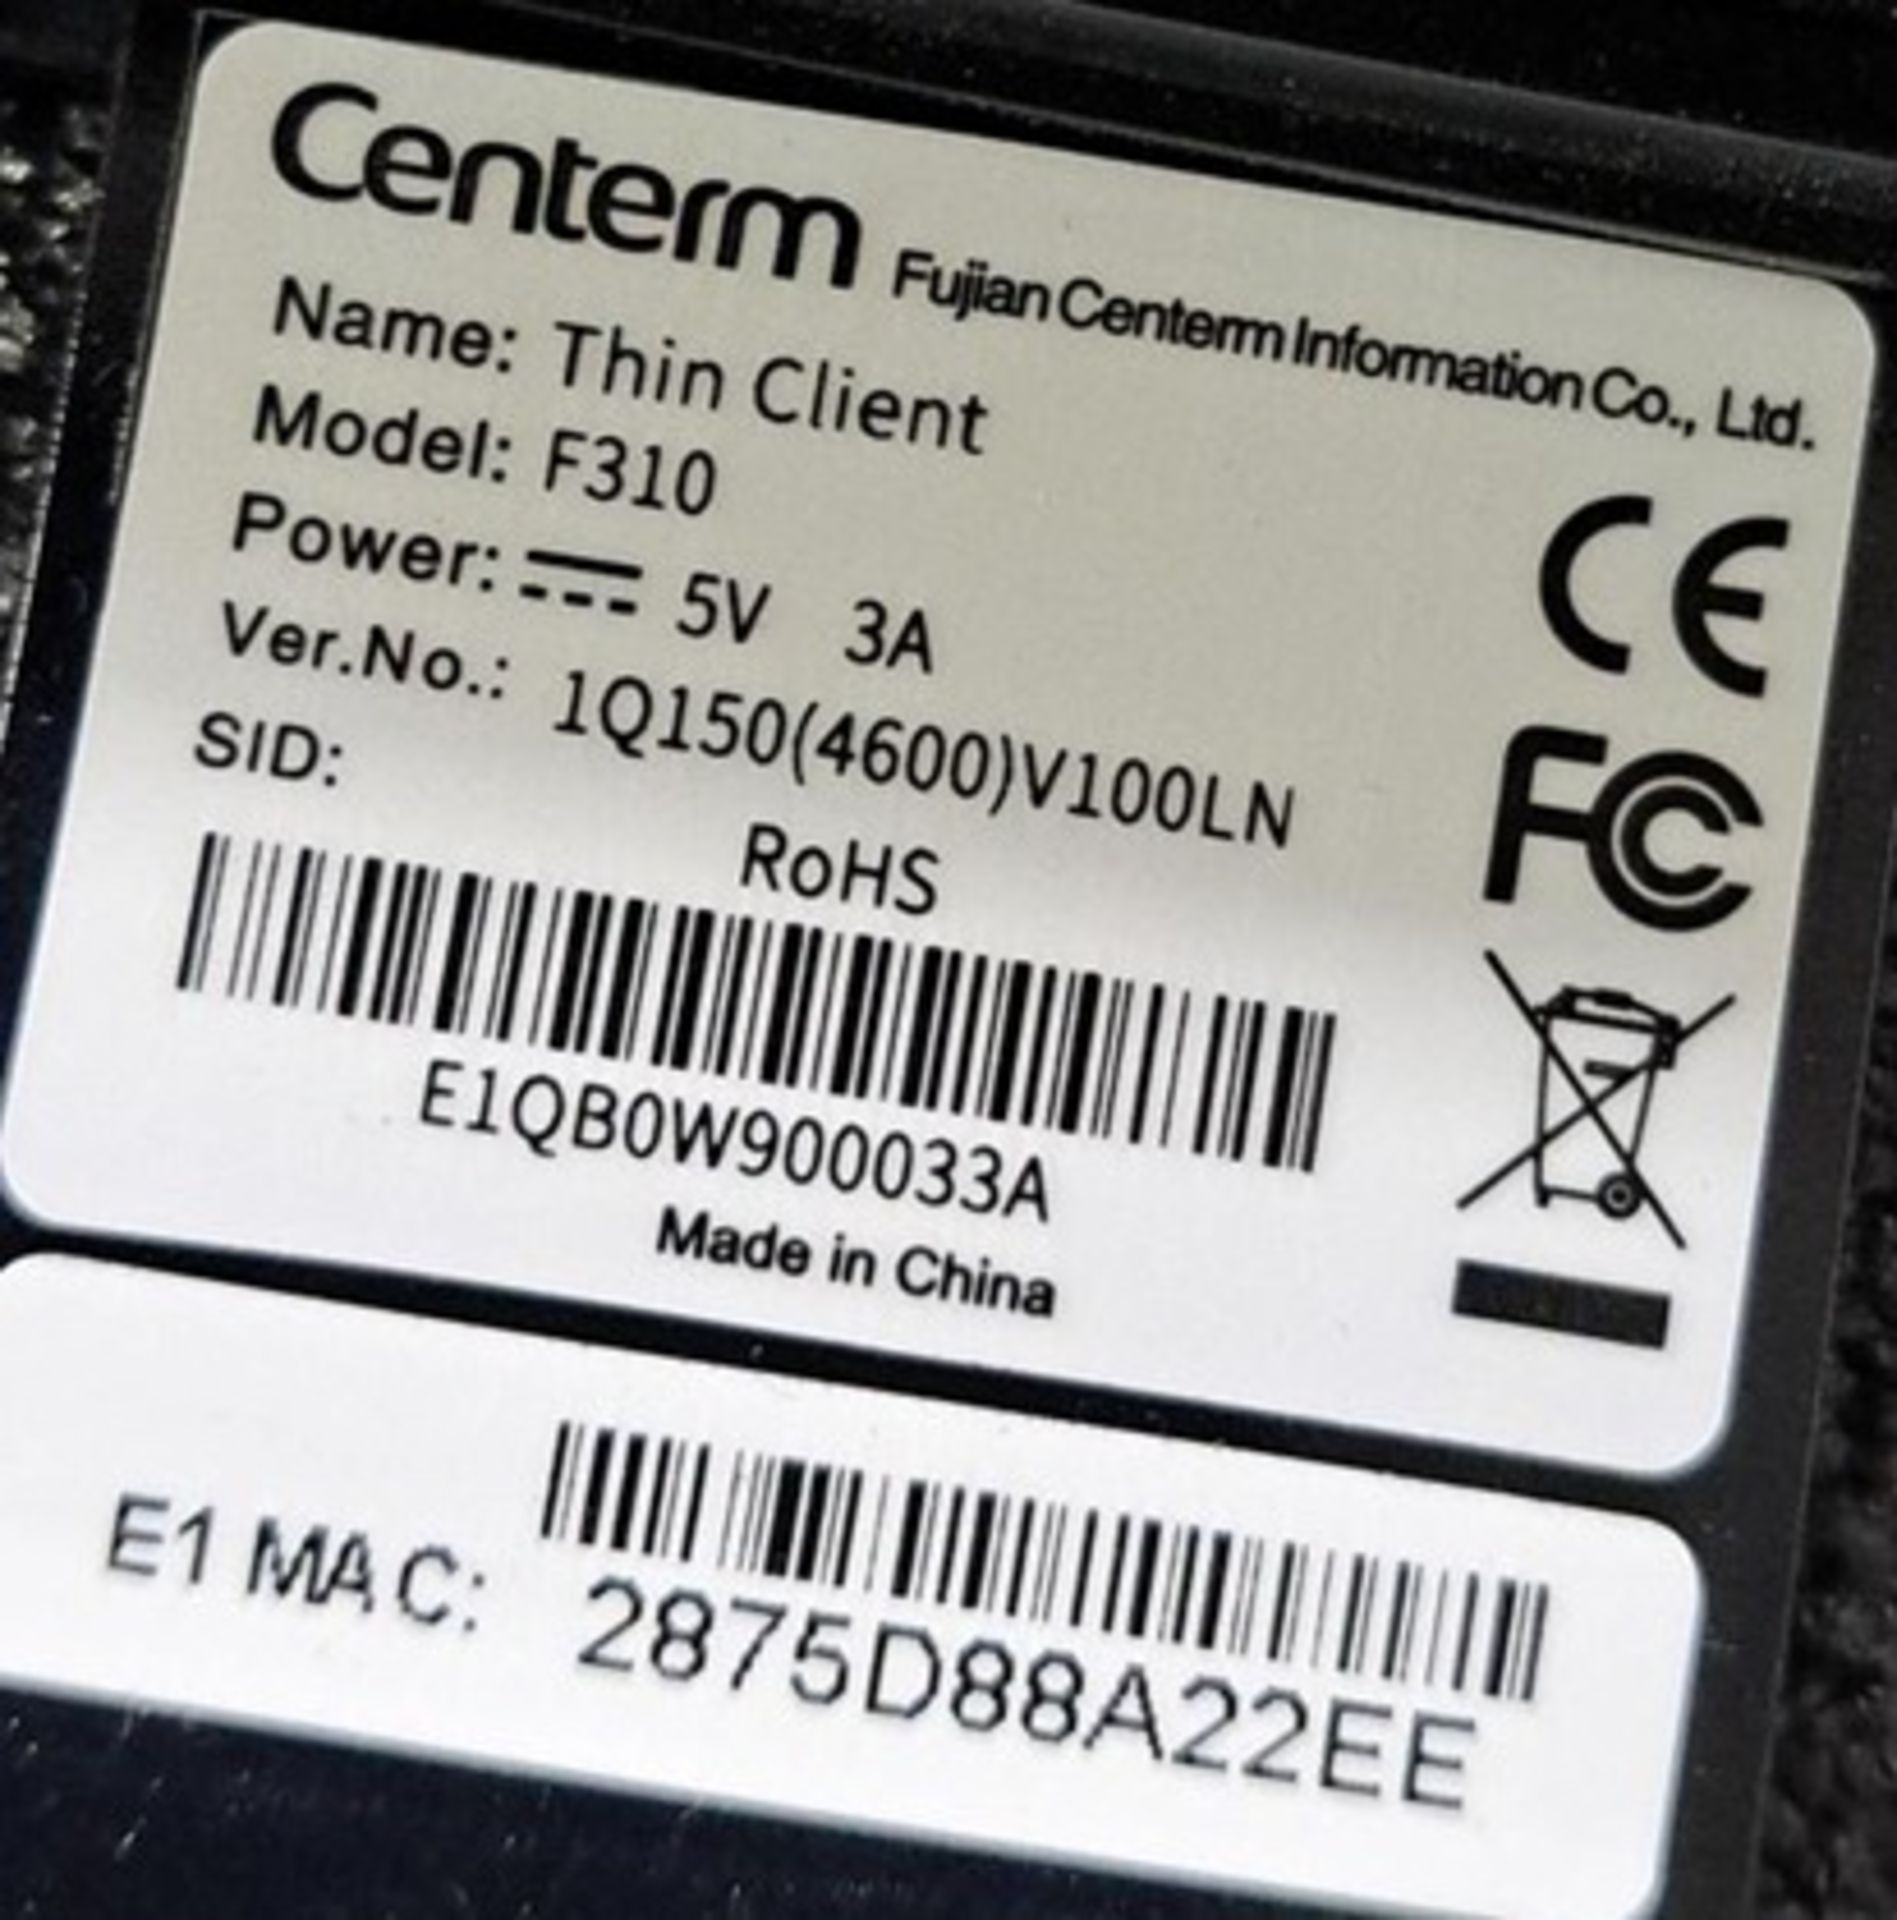 (New equipment) Lot of 2 Thin client containing: 1 Centerm Thin client, F320 Model, SN; Includes 22 - Image 2 of 3